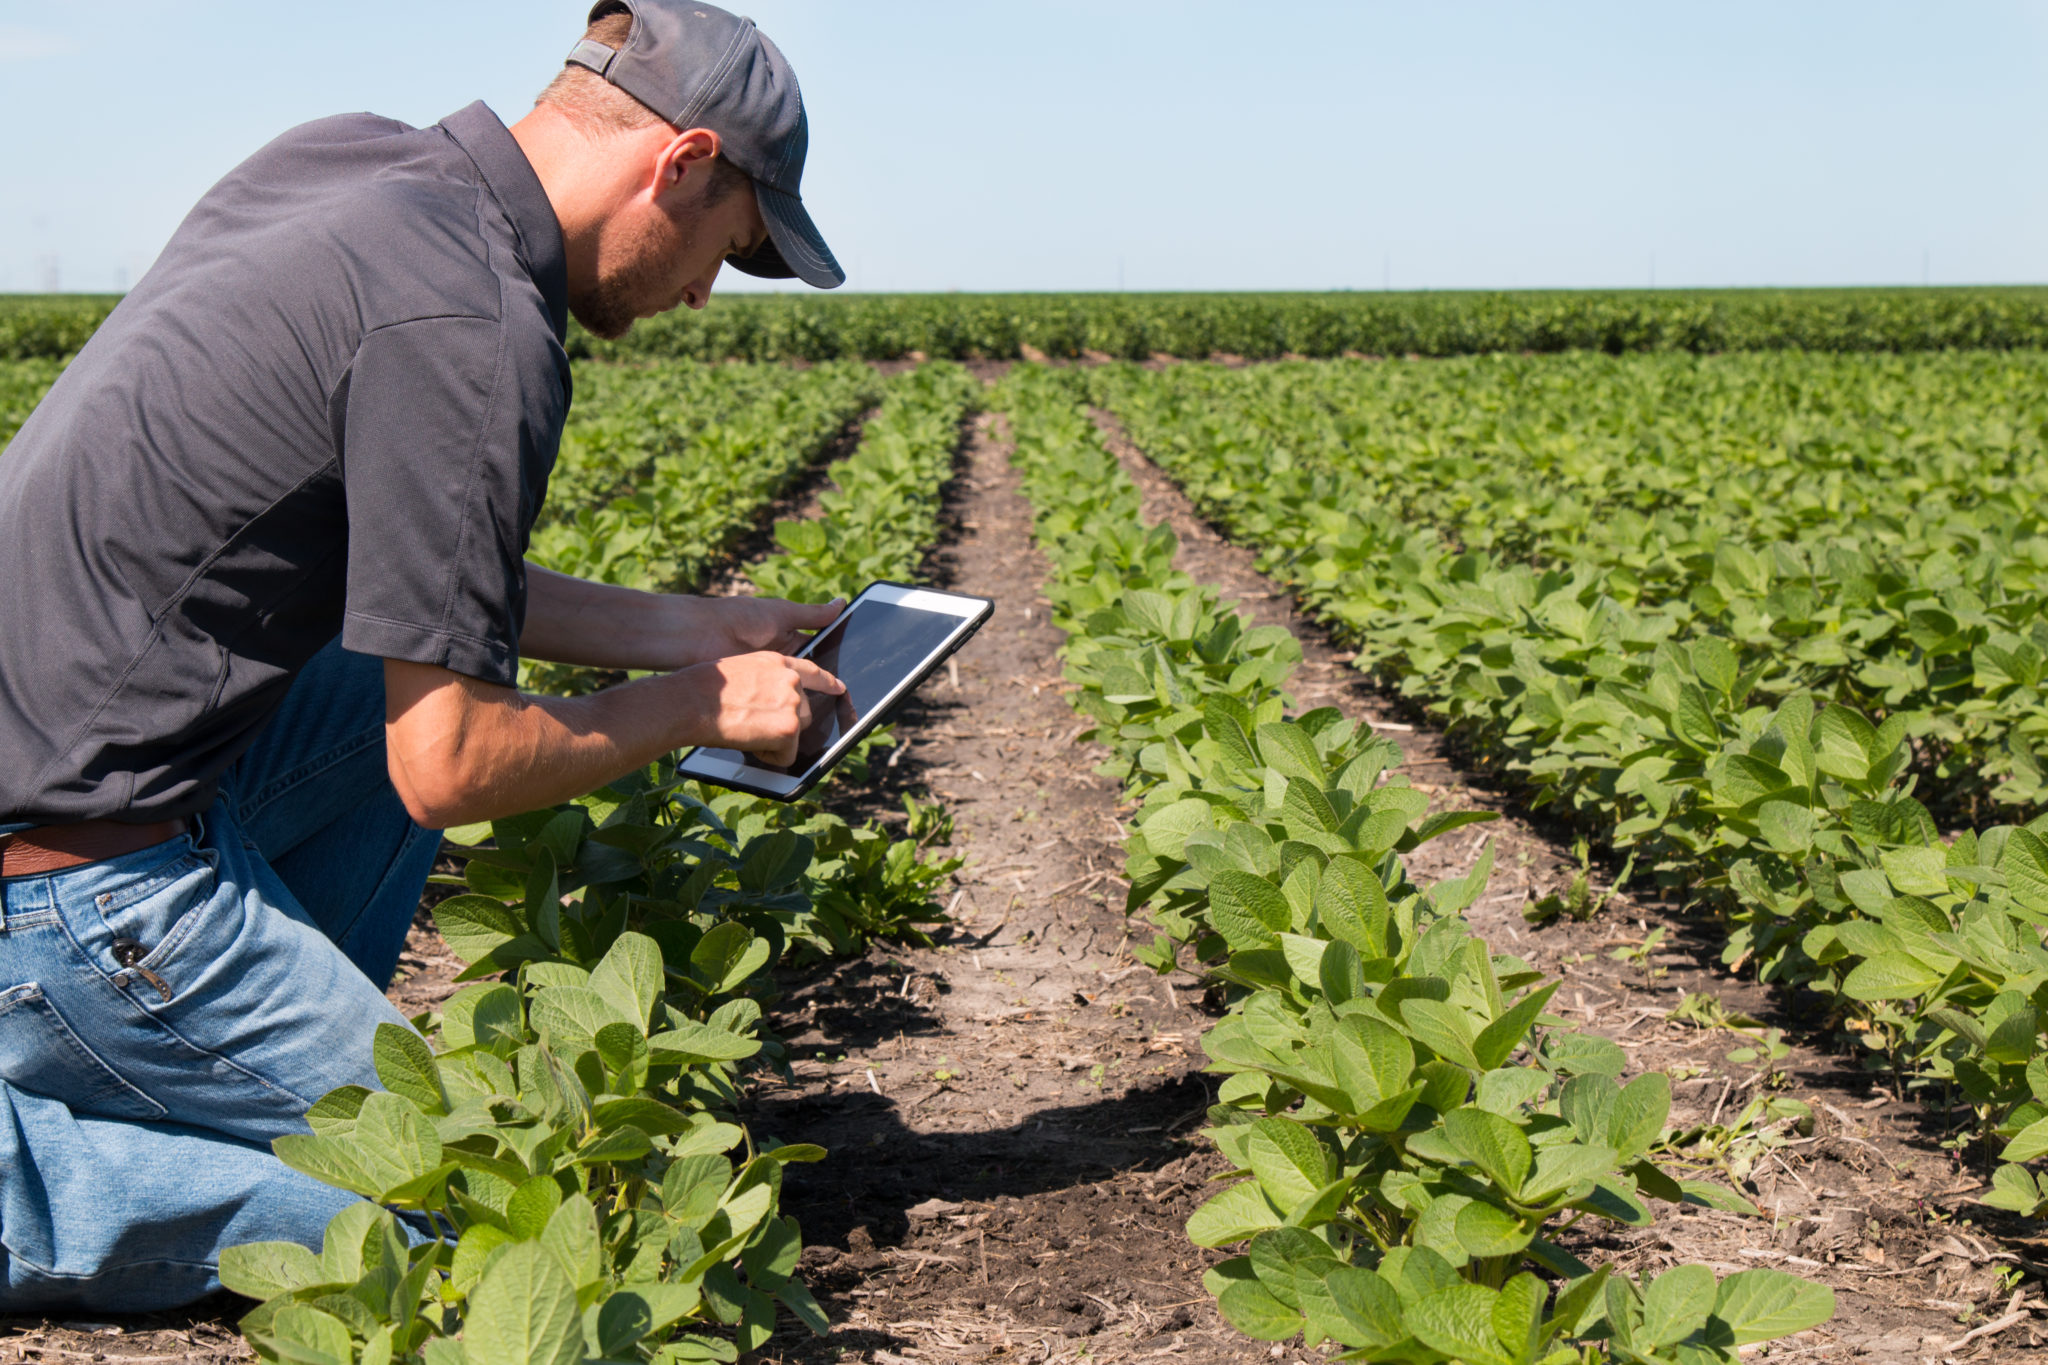 Agronomist using a tablet in a field